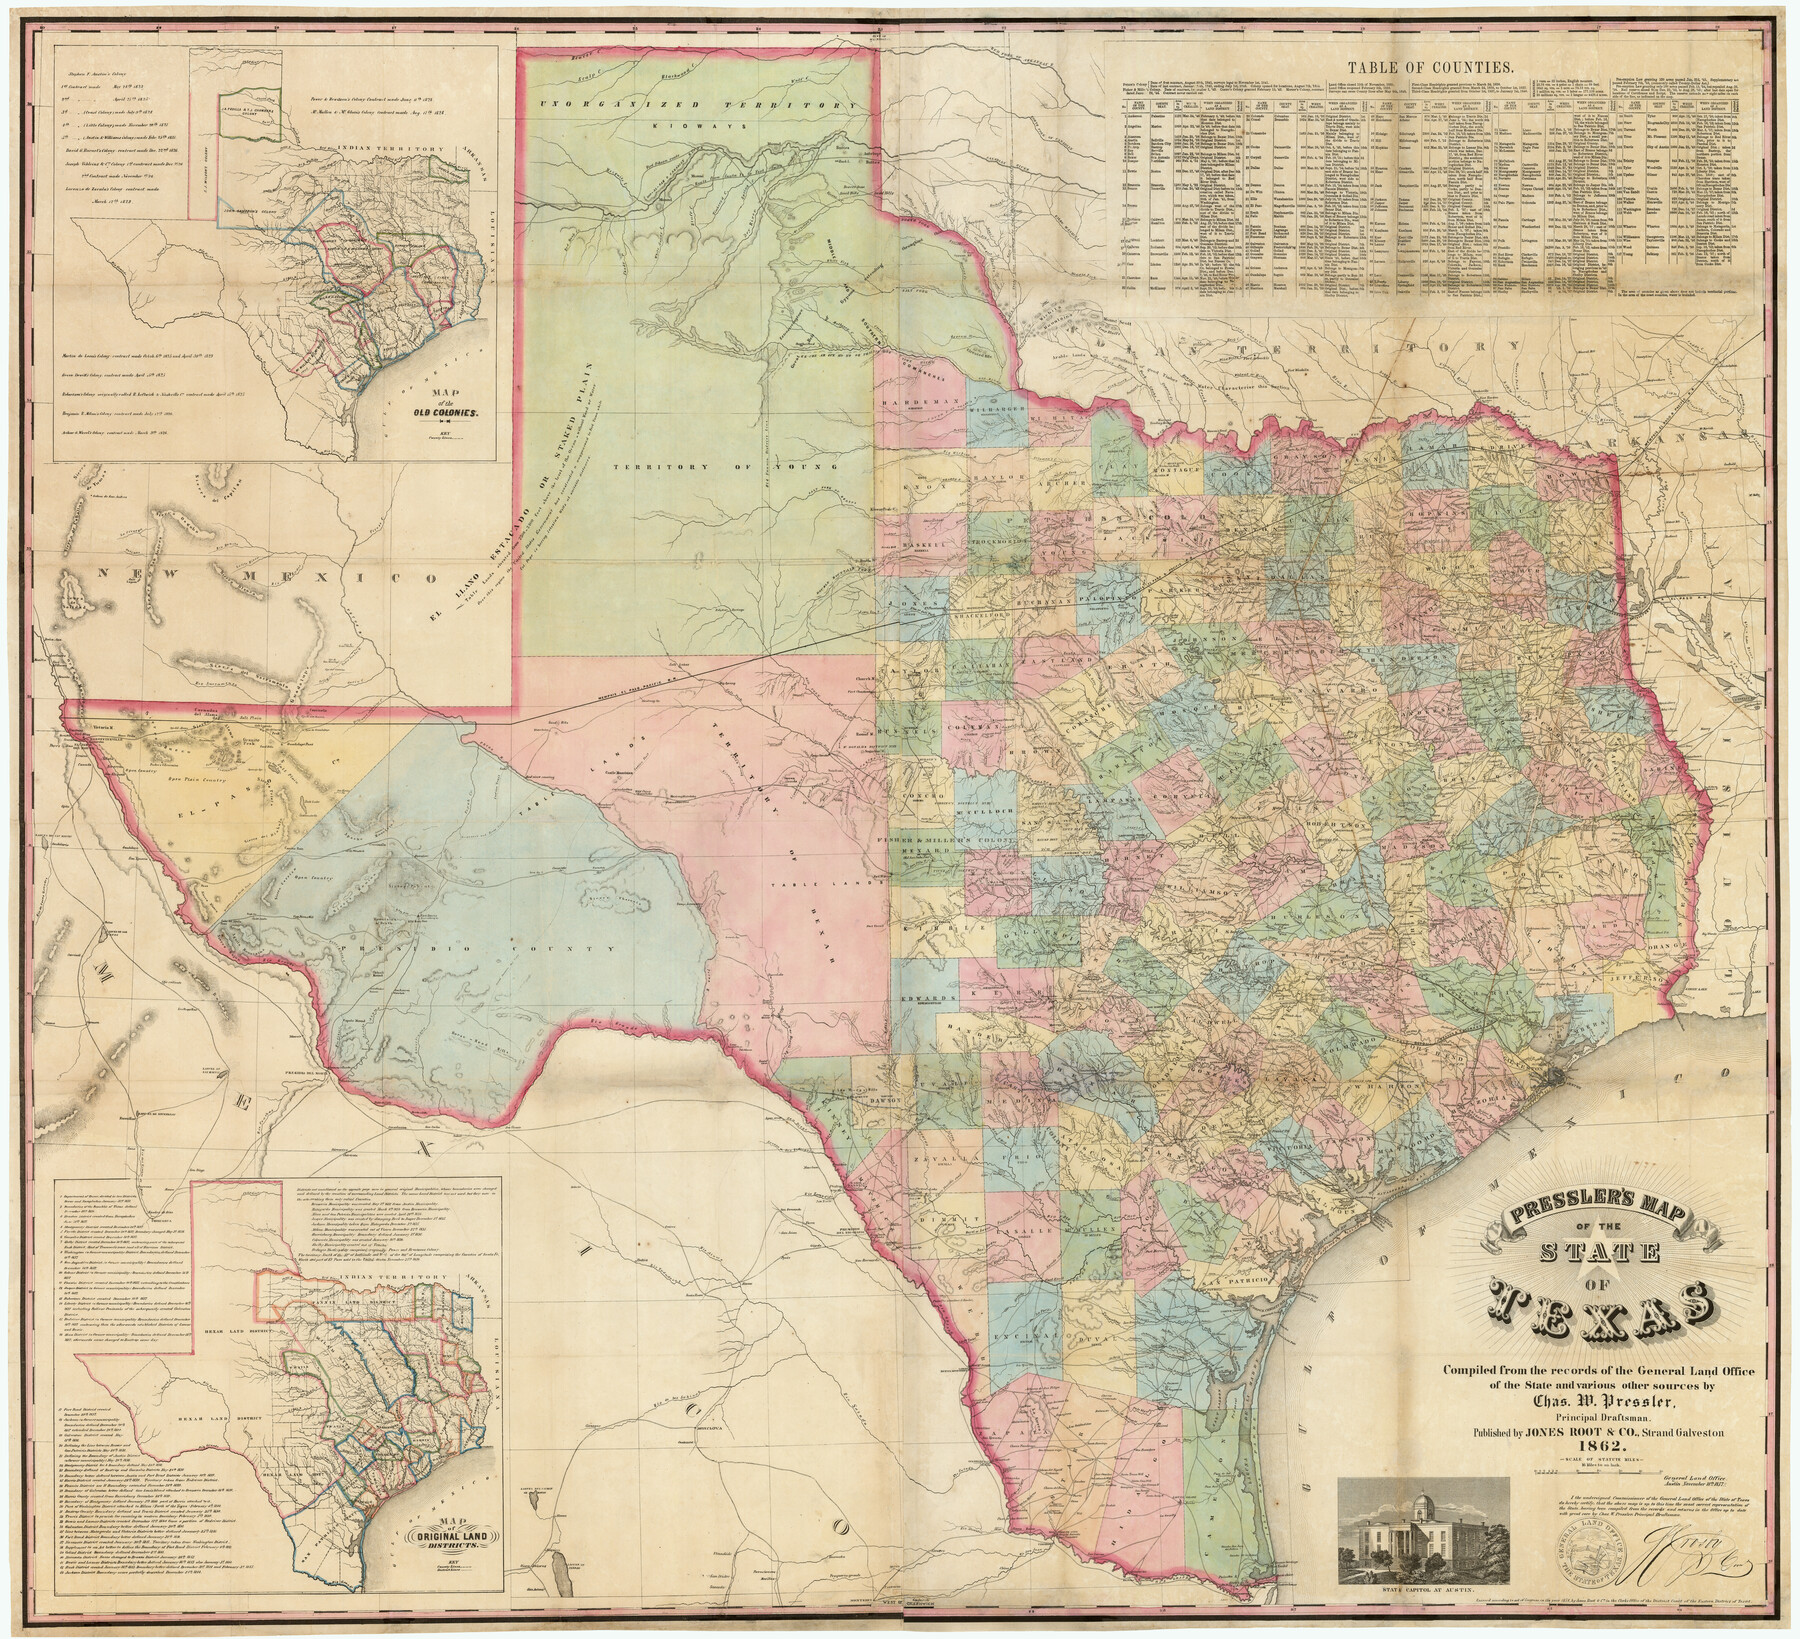 95714, Pressler's Map of the State of Texas, Holcomb Digital Map Collection